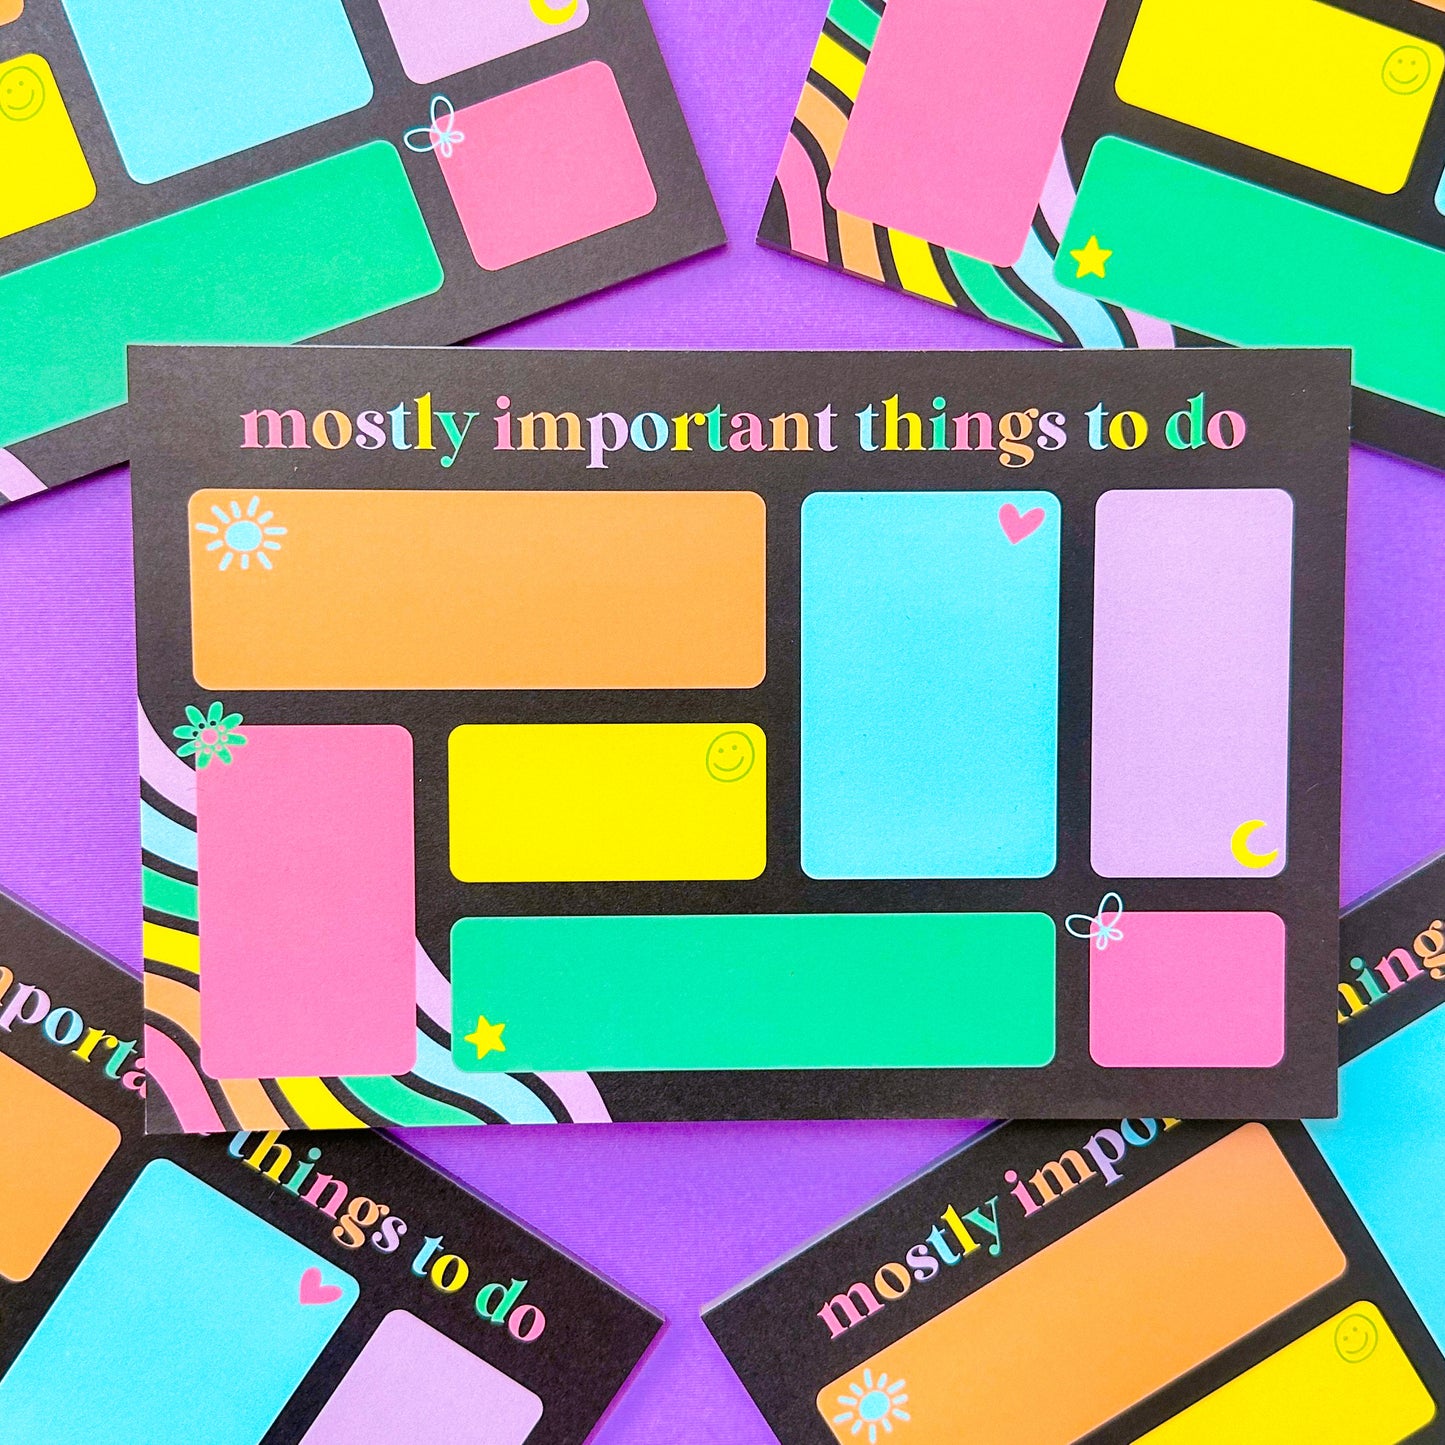 5.5x8.5 Desk Pad - Rainbow "Mostly Important Things To Do"